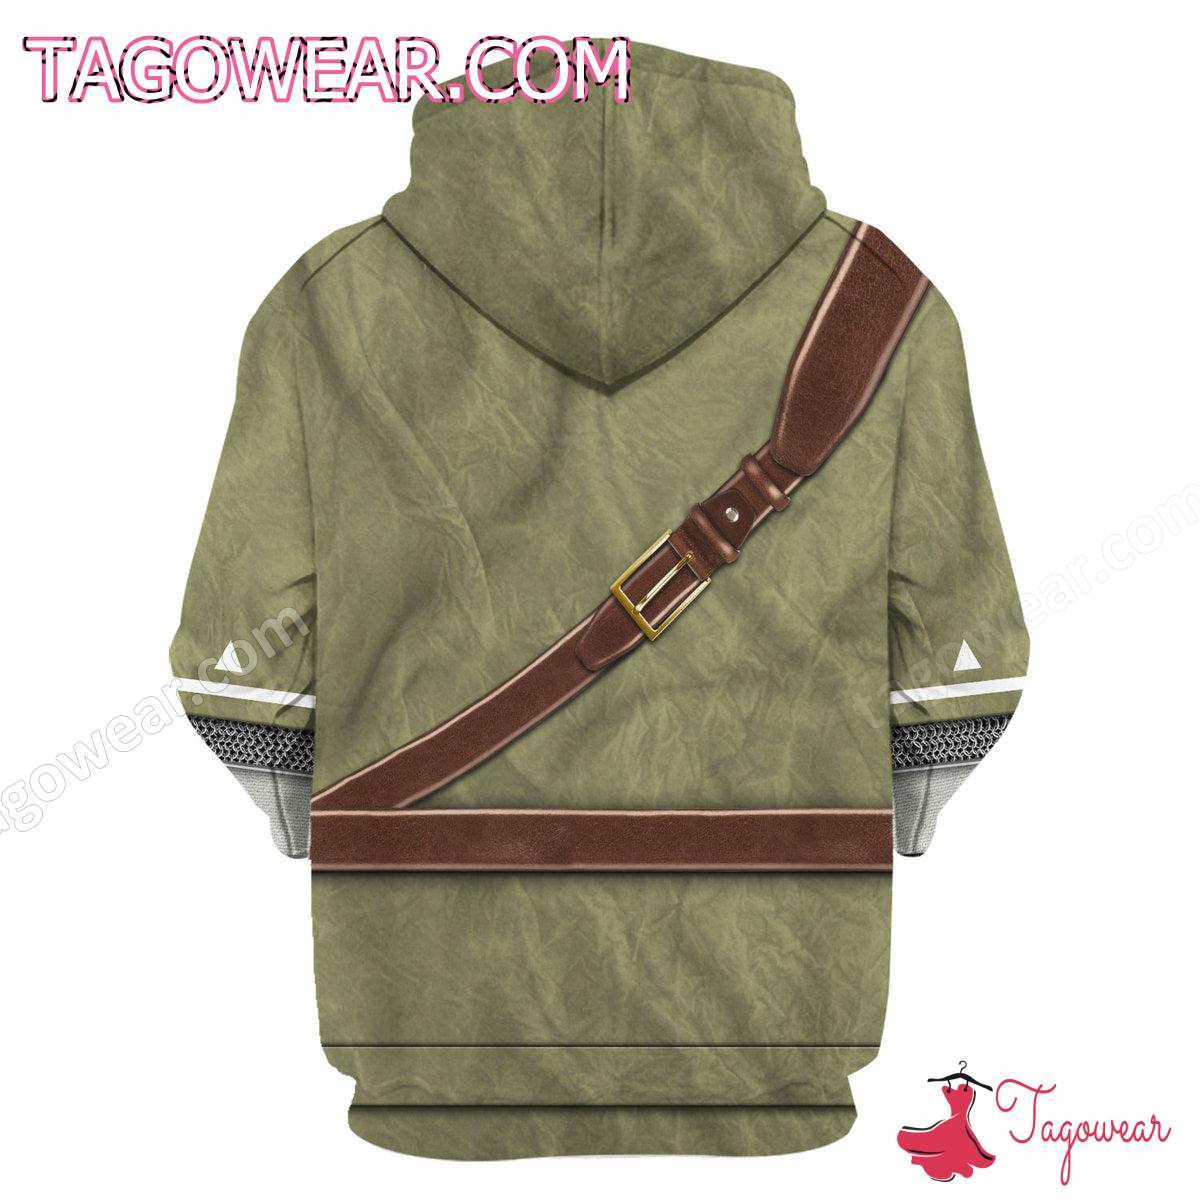 Link The Legend Of Zelda Costumes Shirt, Hoodie And Pants a